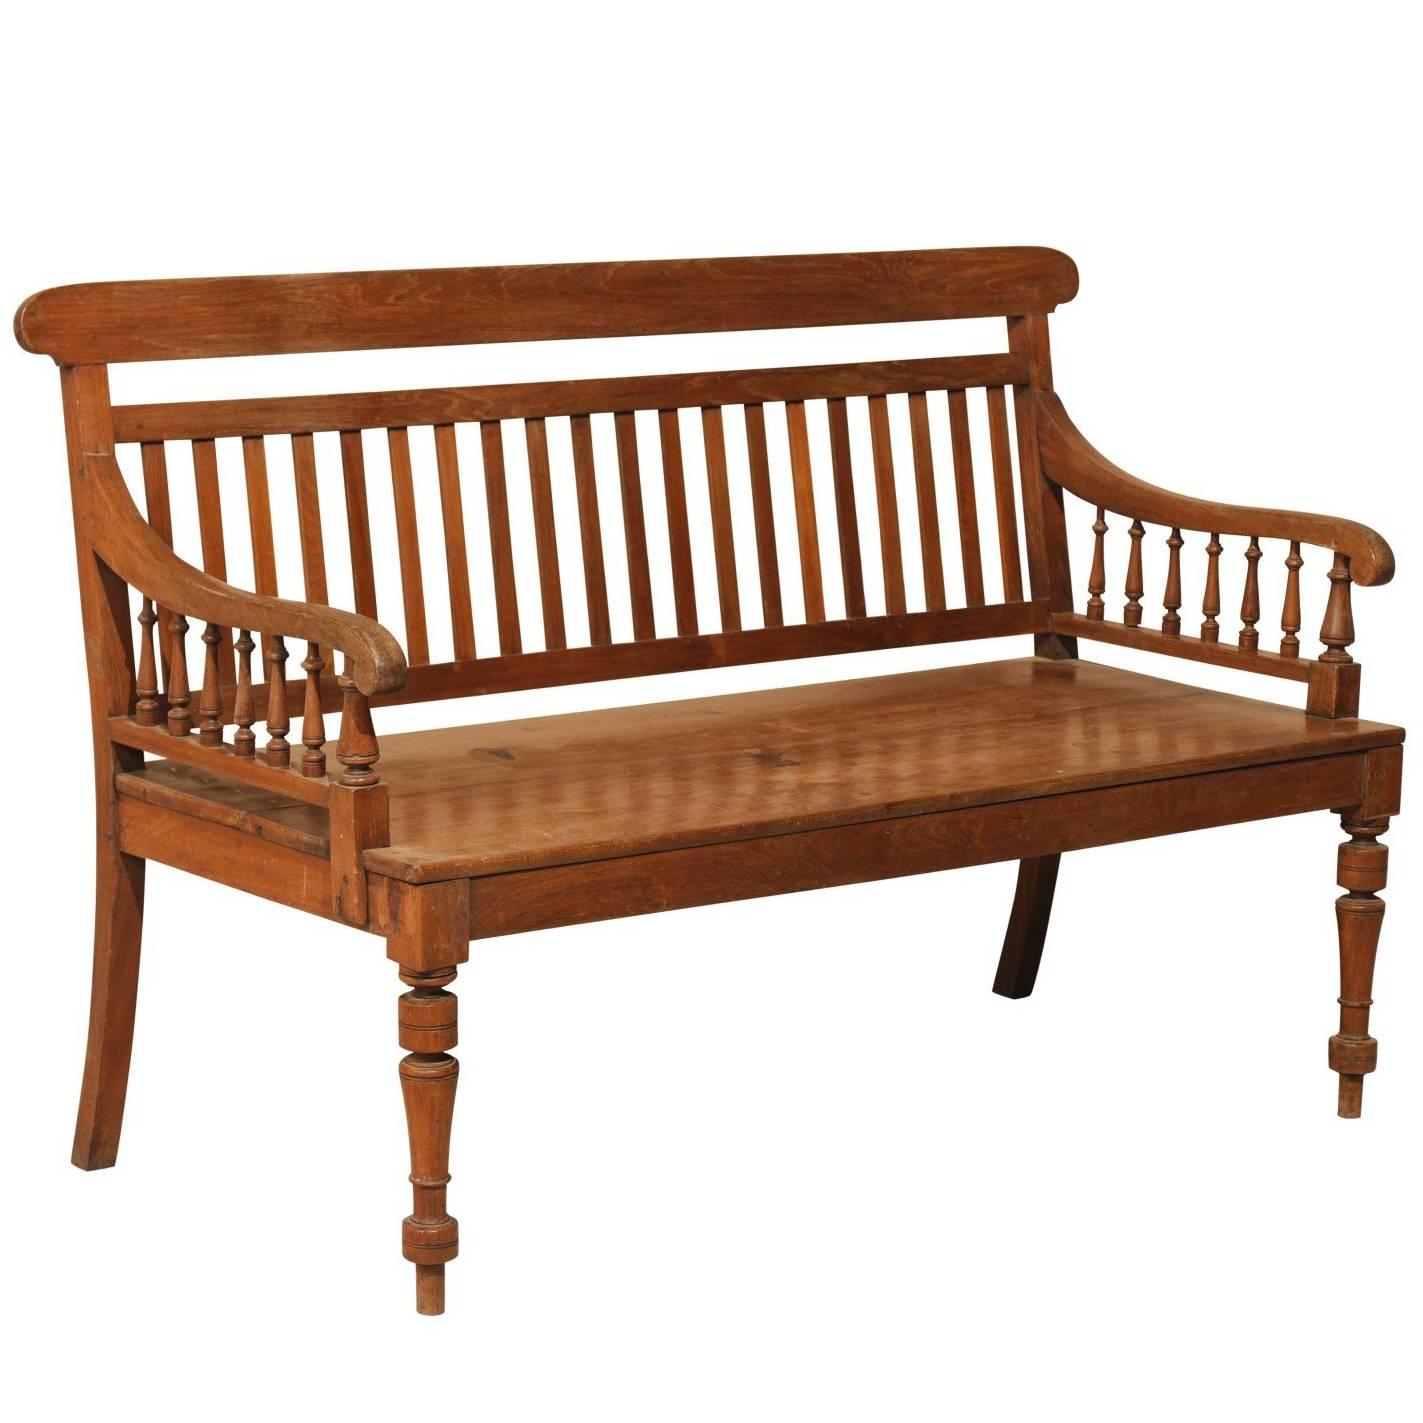 British Colonial Style Teak Wood Bench with Slats on the Backrest & Turned Legs